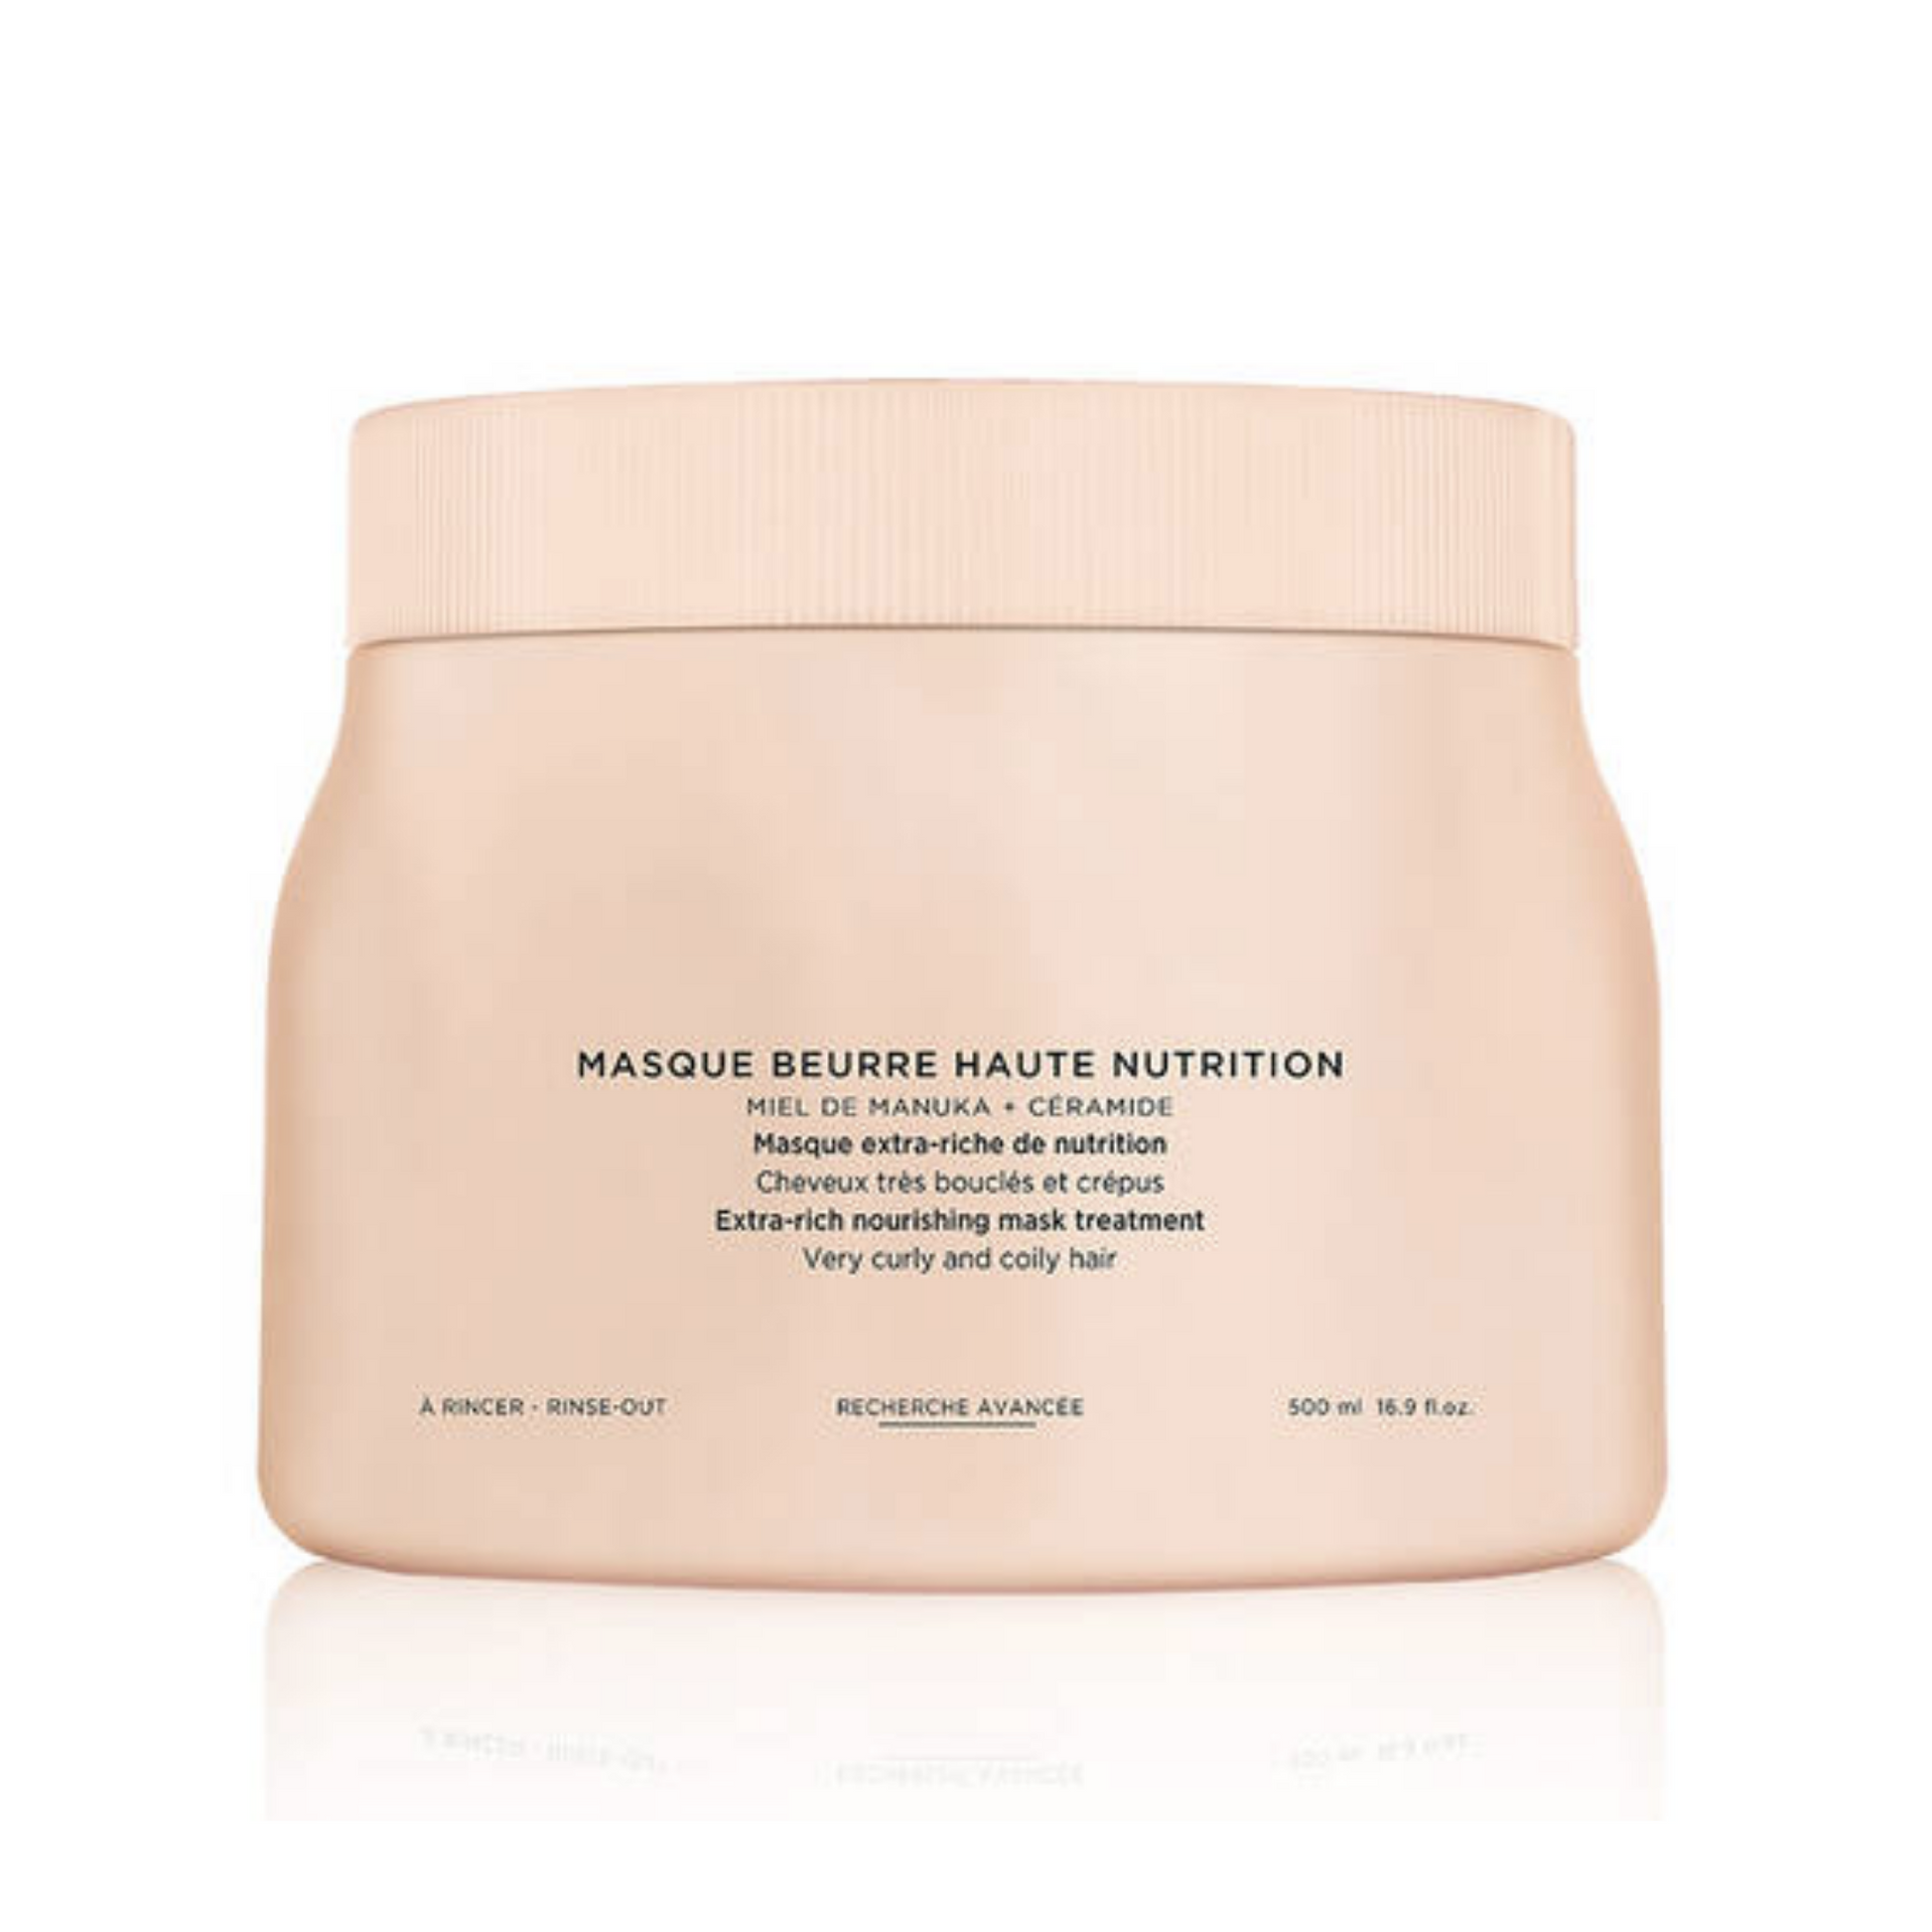 Masque Beurre Haute Nutrition Hair Mask 500ml - Extra-rich nourishing hair mask treatment for very curly and coily hair.